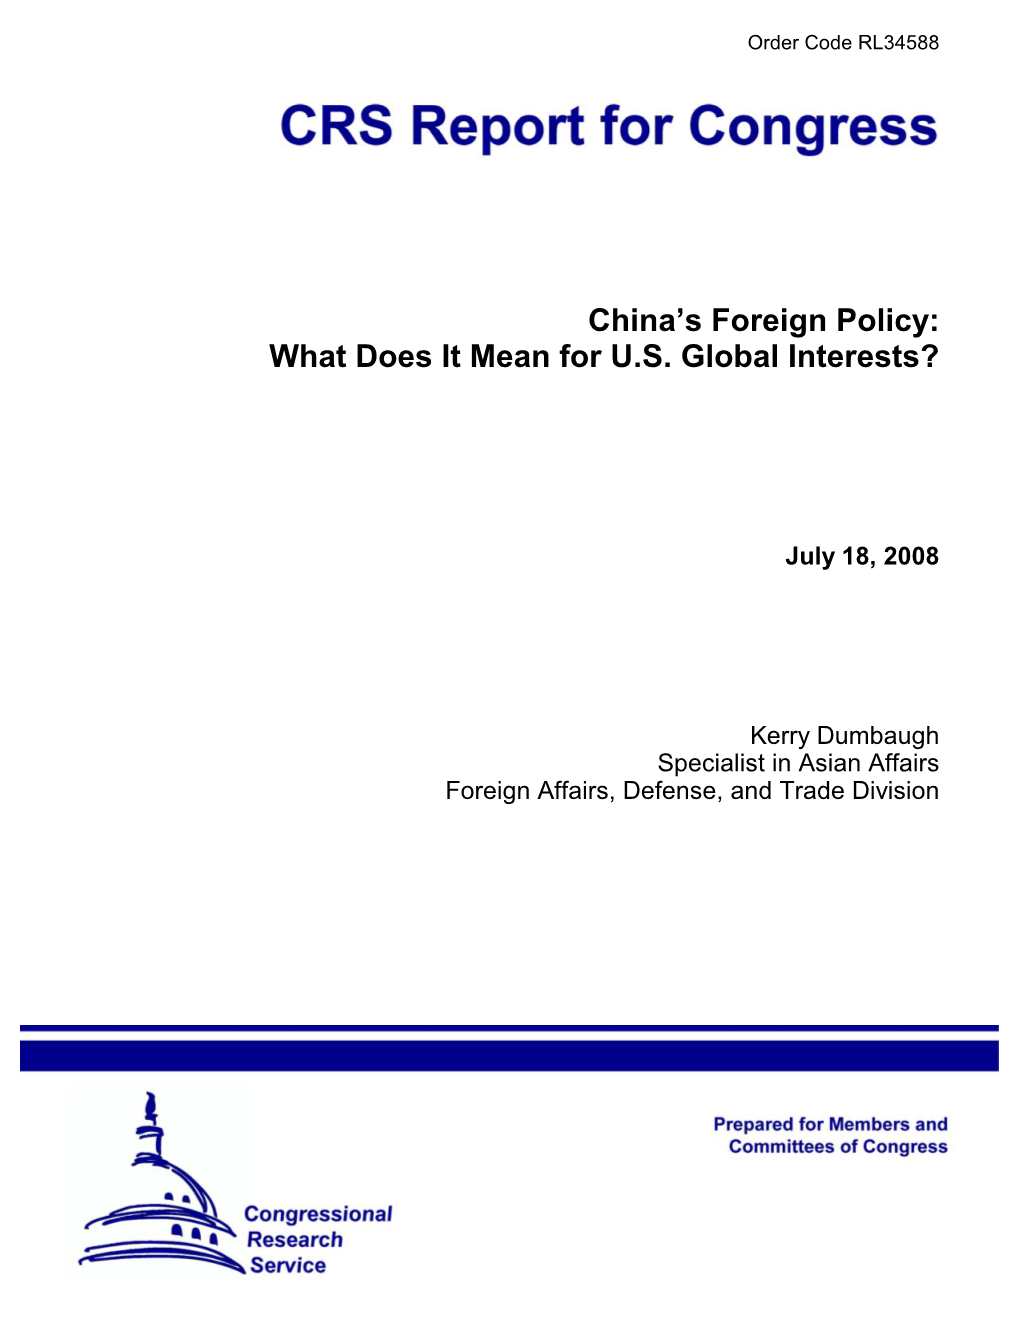 China's Foreign Policy: What Does It Mean for U.S. Global Interests?